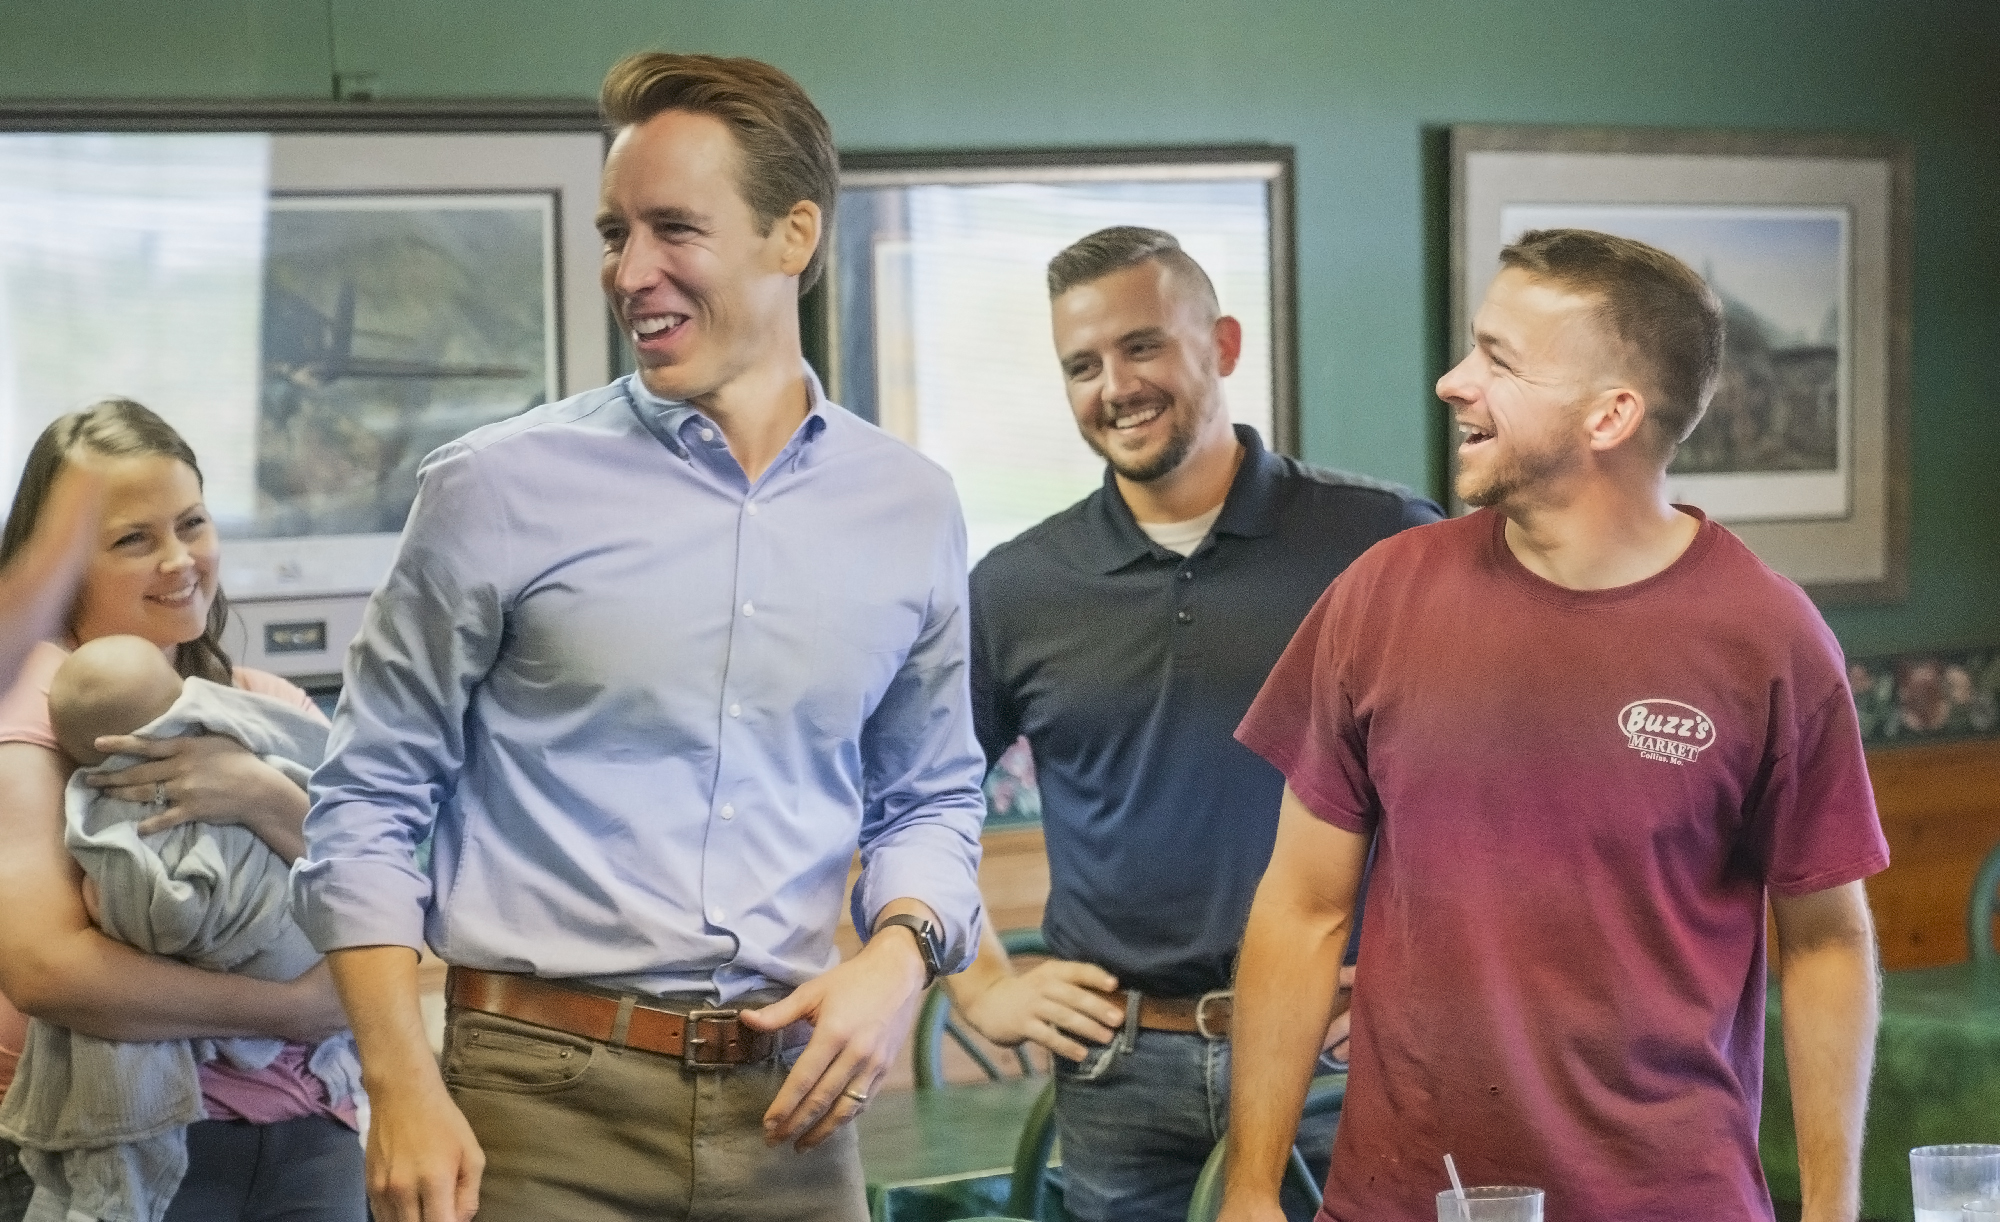 Senator Hawley meets the Marquis family at the start of his visit in Collins, Missouri.